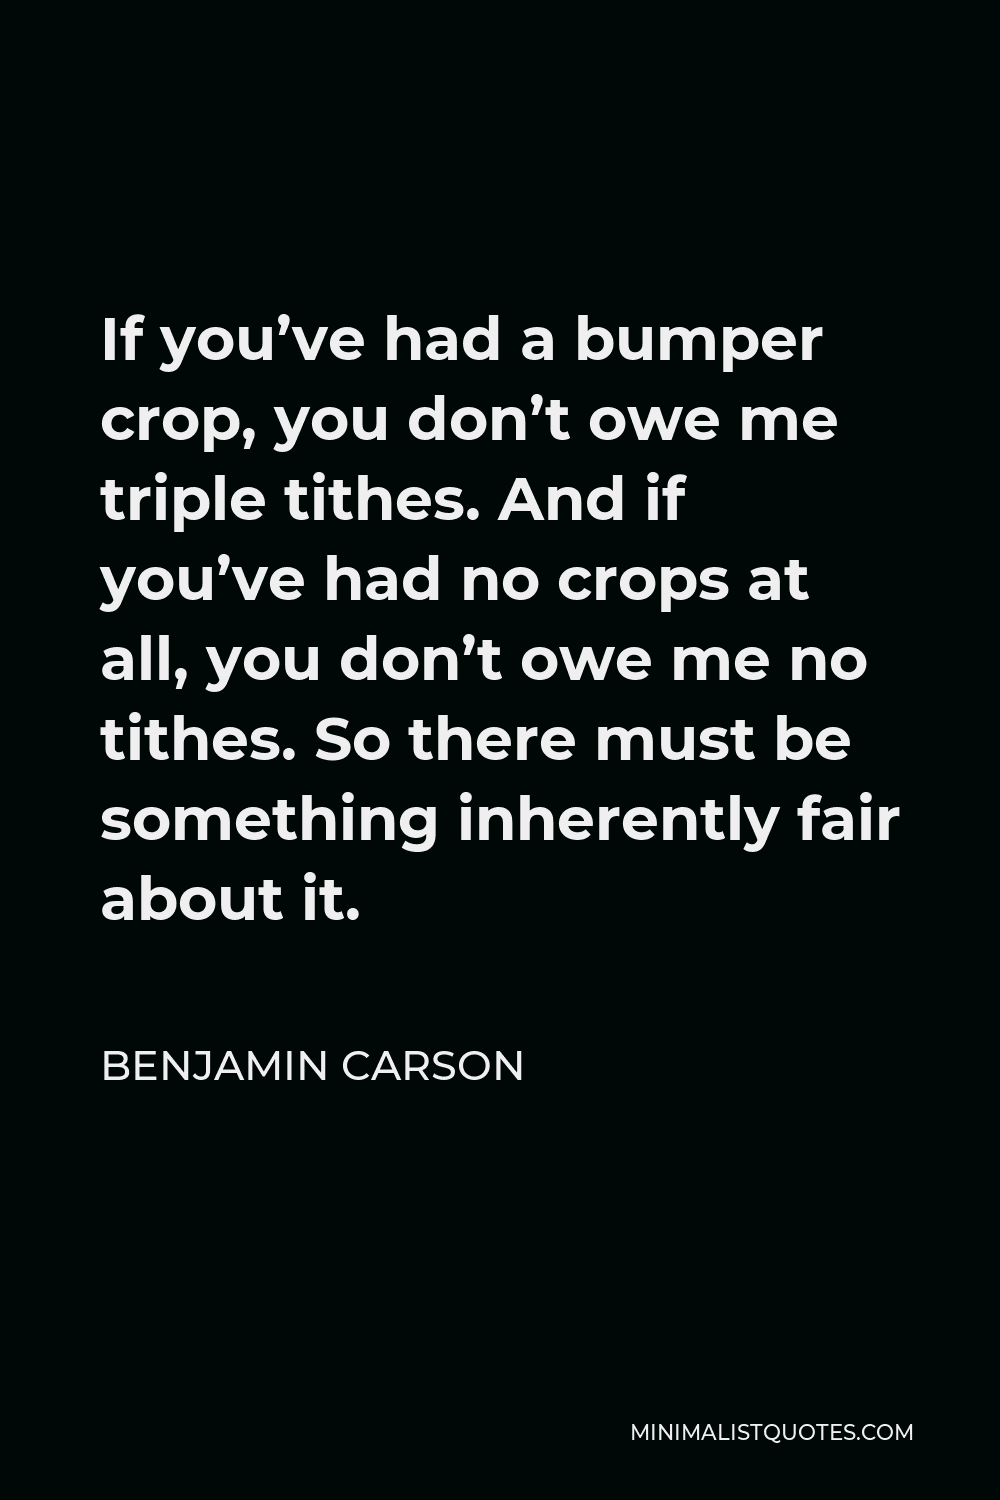 Benjamin Carson Quote - If you’ve had a bumper crop, you don’t owe me triple tithes. And if you’ve had no crops at all, you don’t owe me no tithes. So there must be something inherently fair about it.